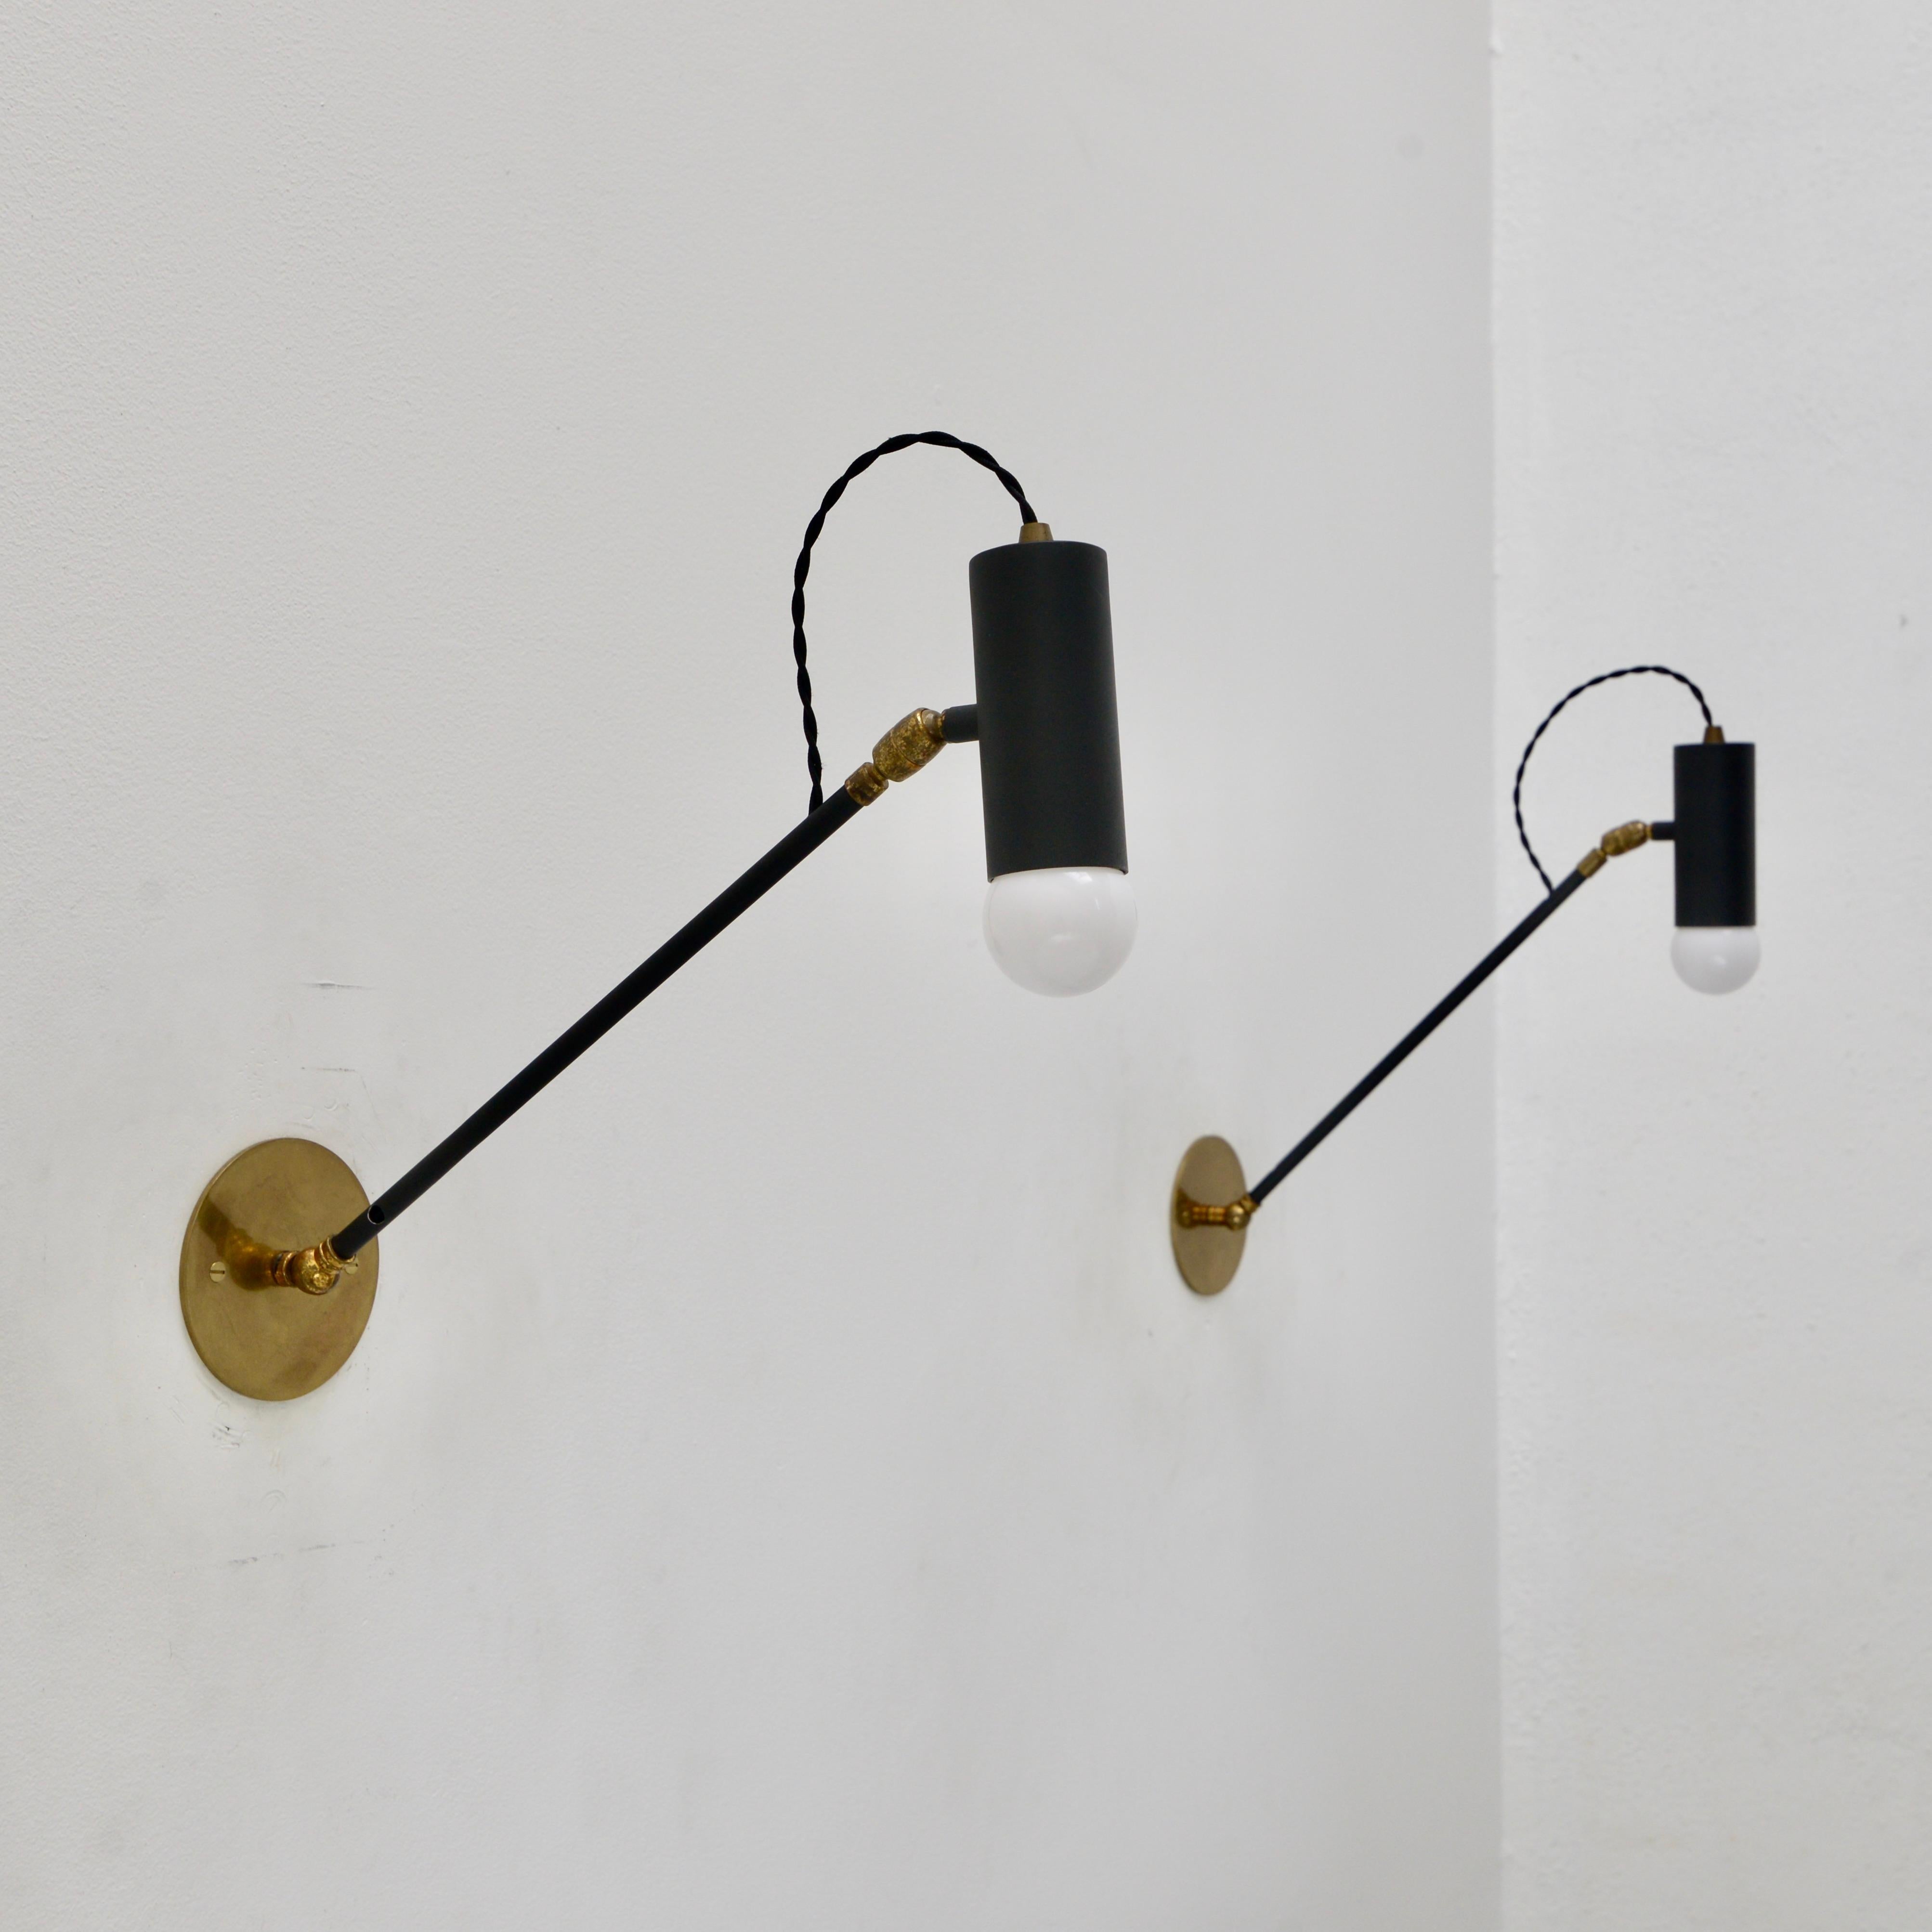 Elegant 1950s pair of Stilnovo Style spot reading sconces from Italy. The sconces project at the maximum 18” and articulate up and down. The shade joint articulates to allow the light to angle up, down, and side to side. The sconces are made from